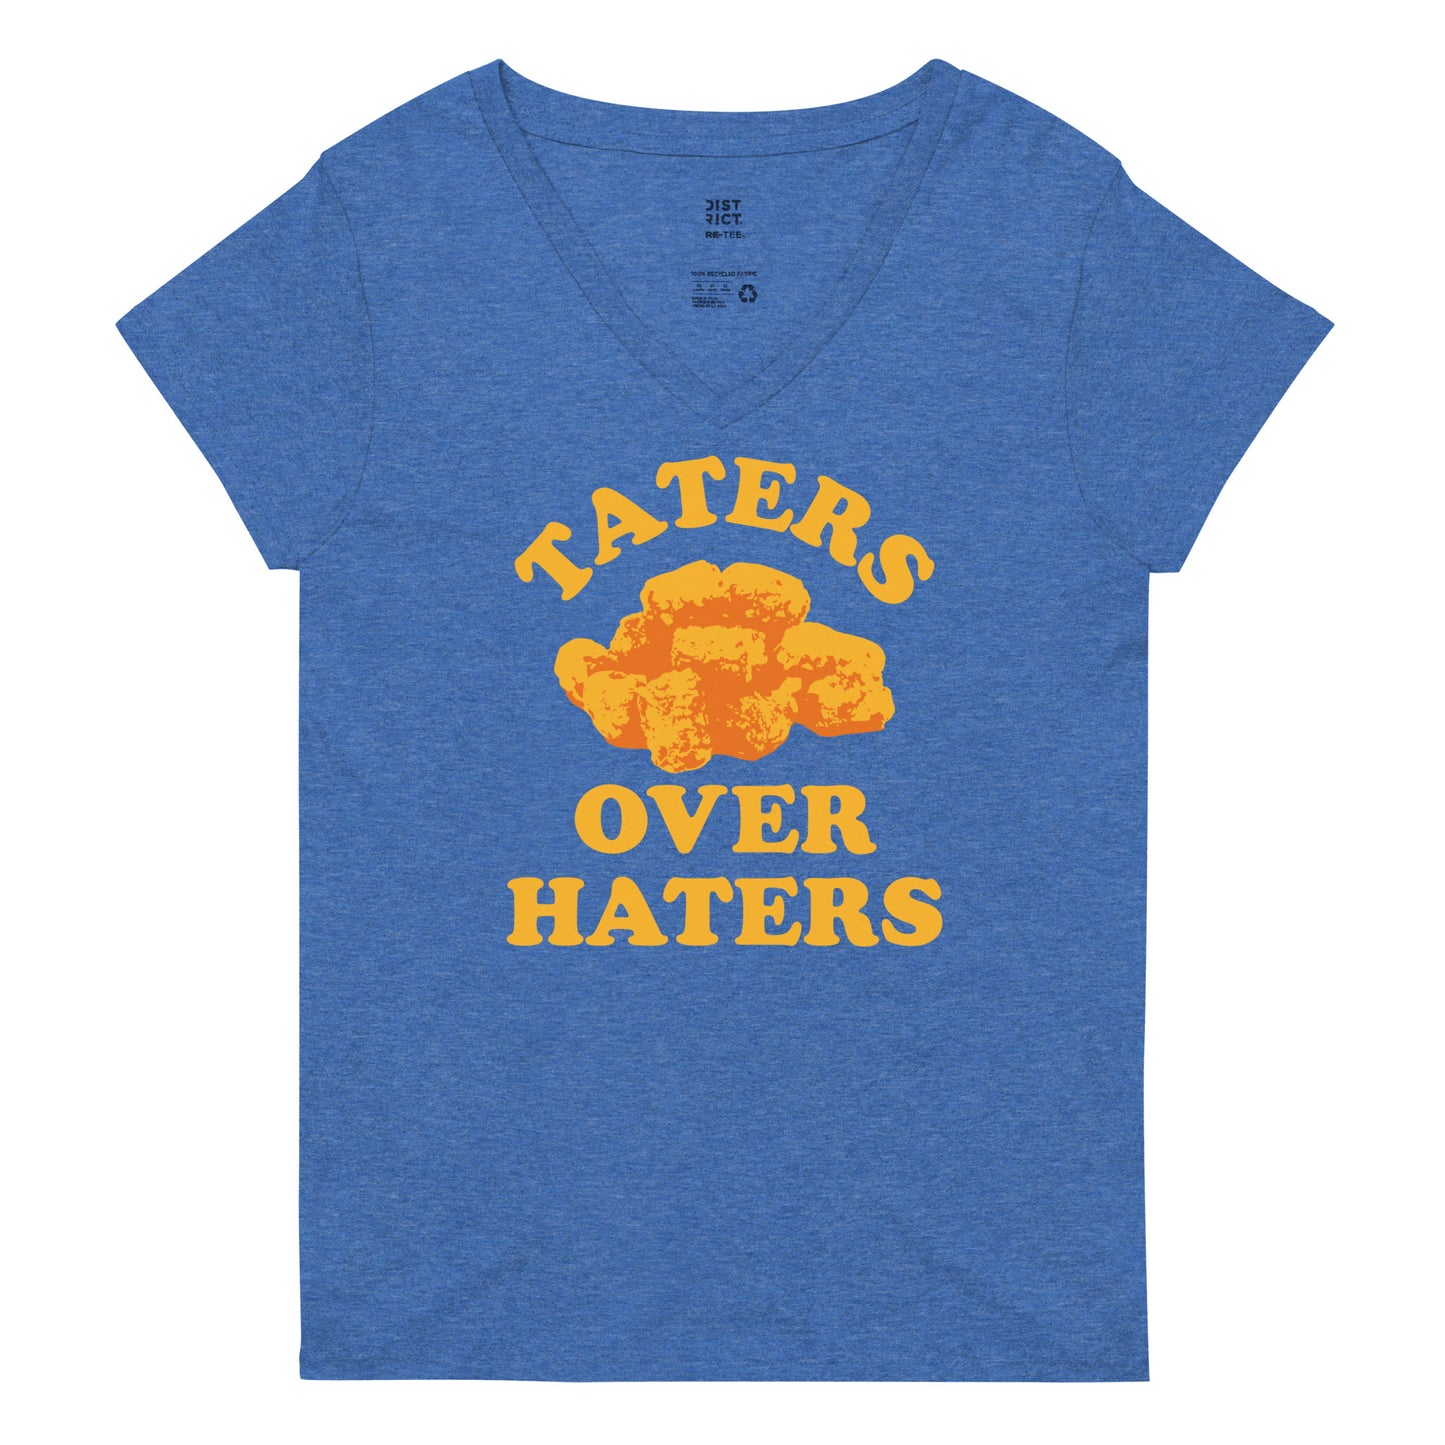 Taters Over Haters Women's V-Neck Tee